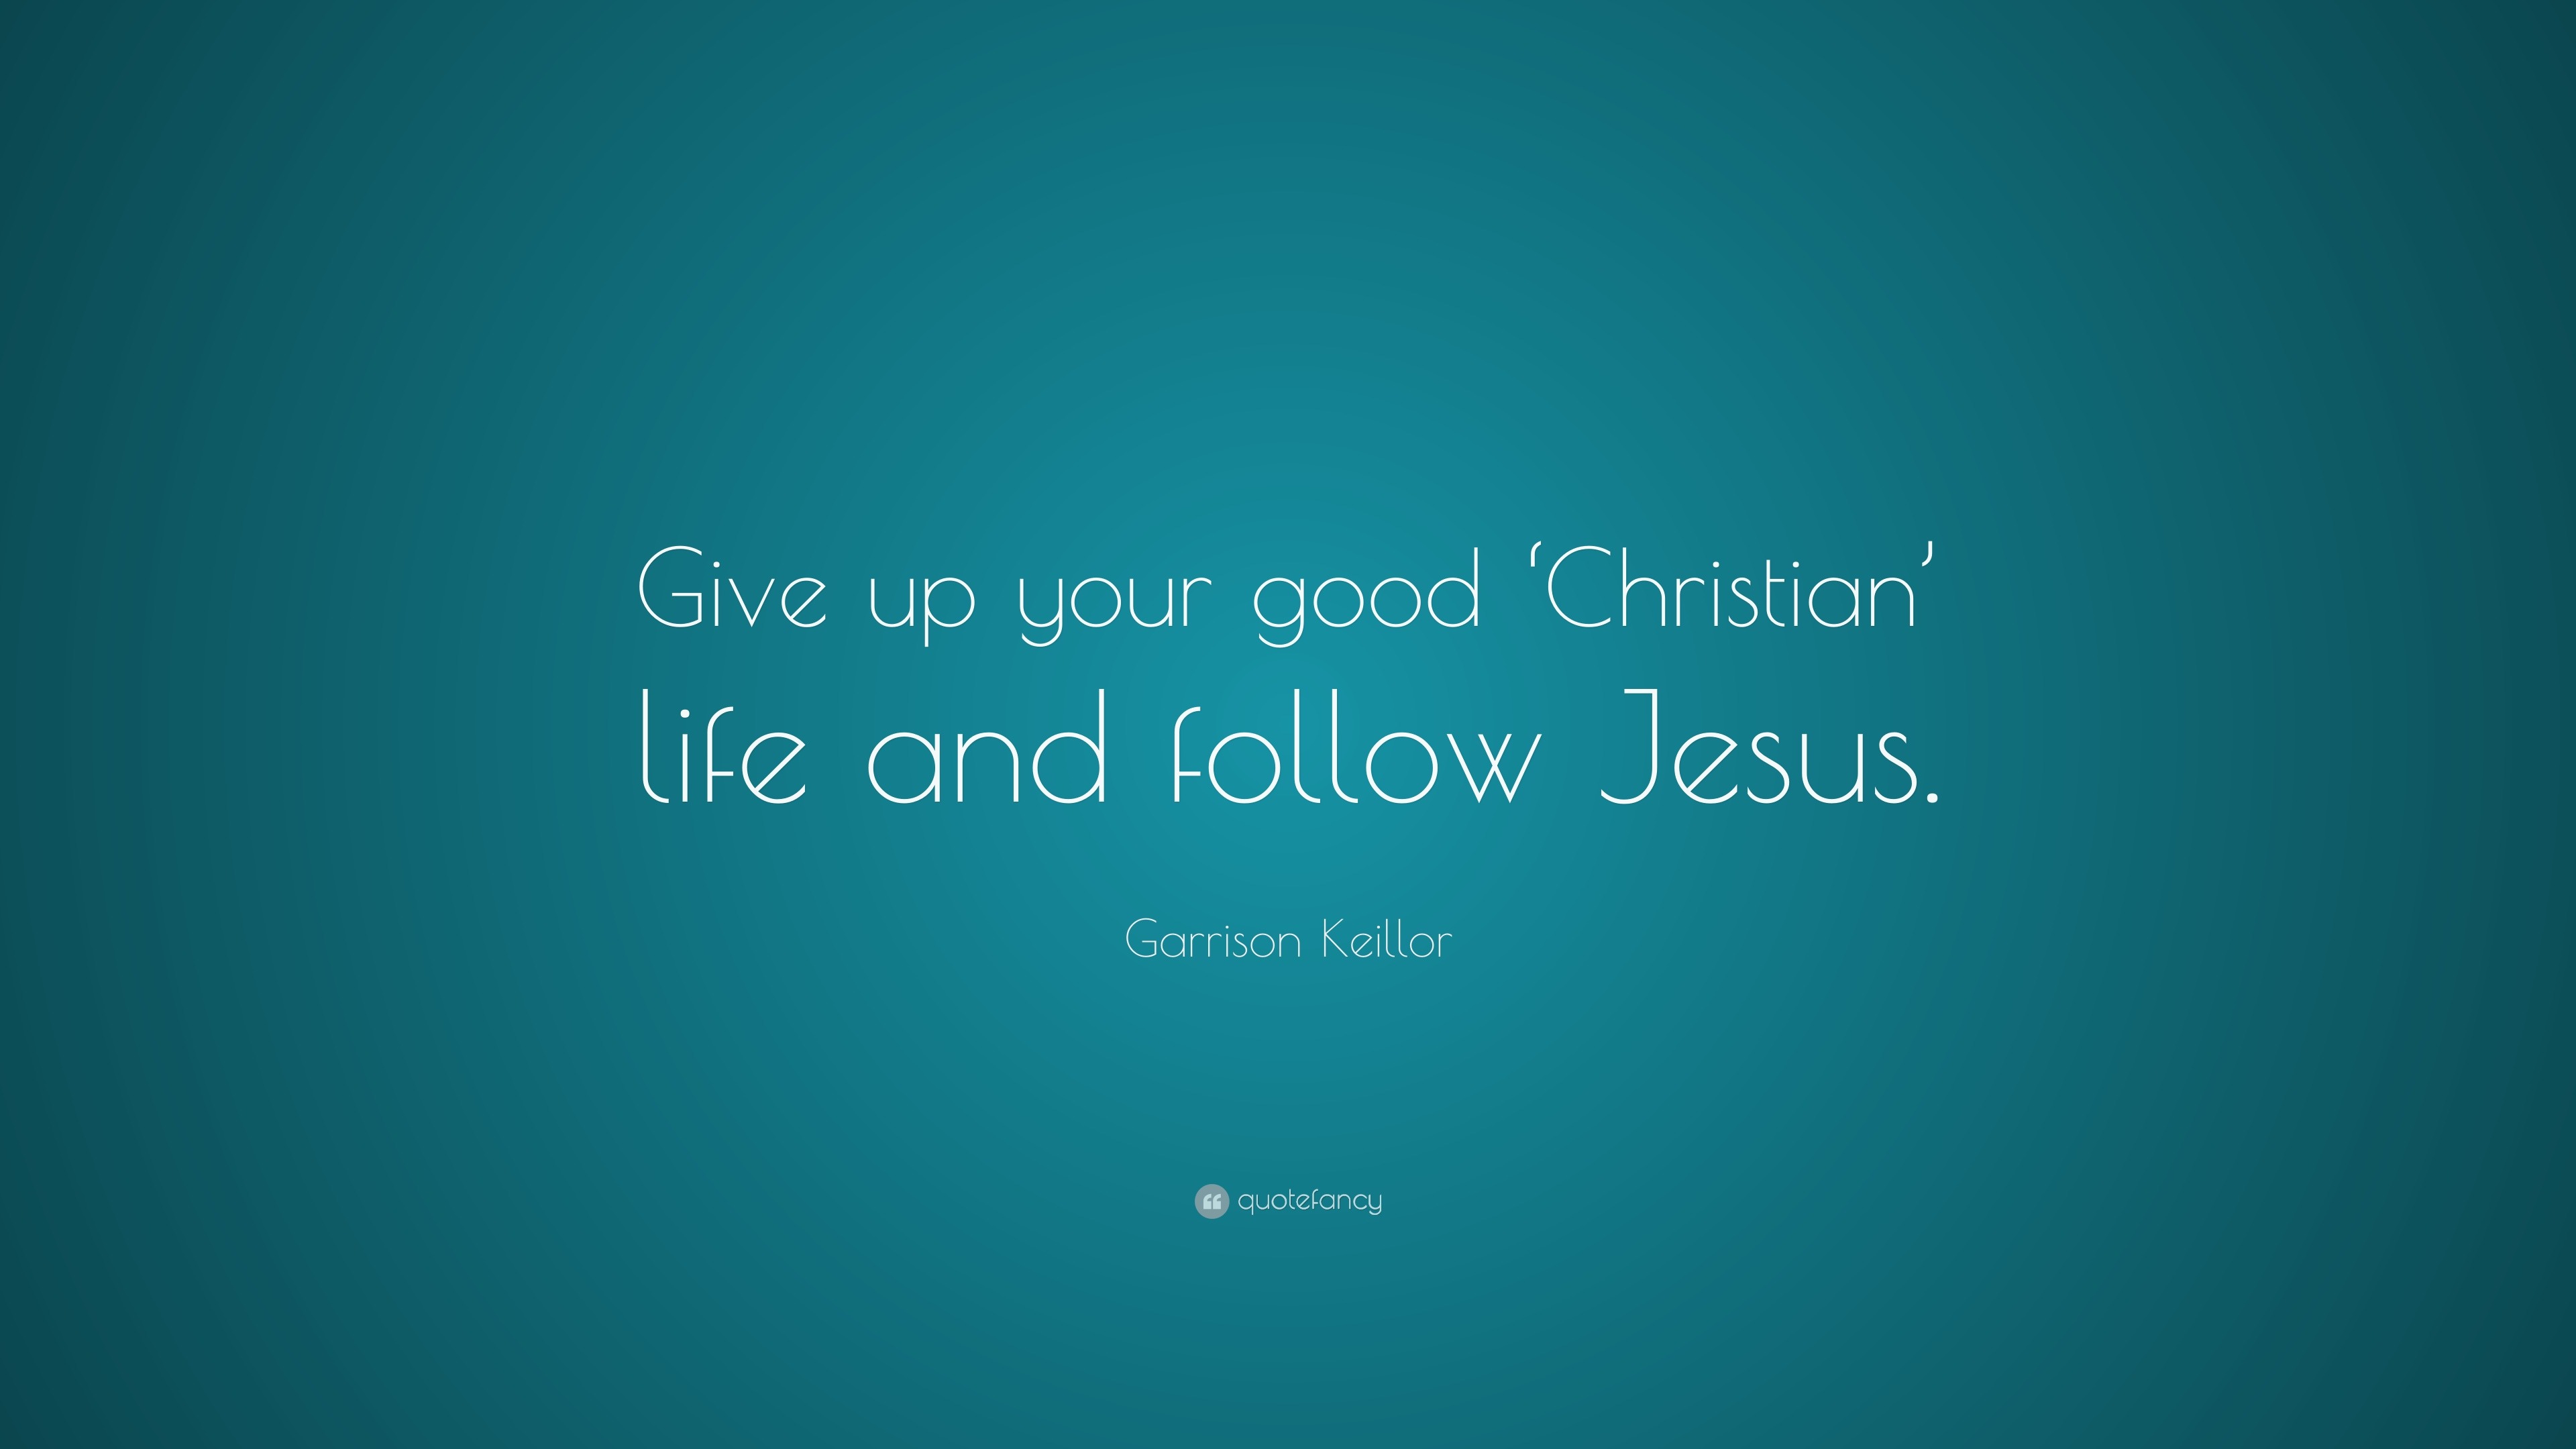 christian quotes give up your good christian life and follow jesus - Christian Quotes